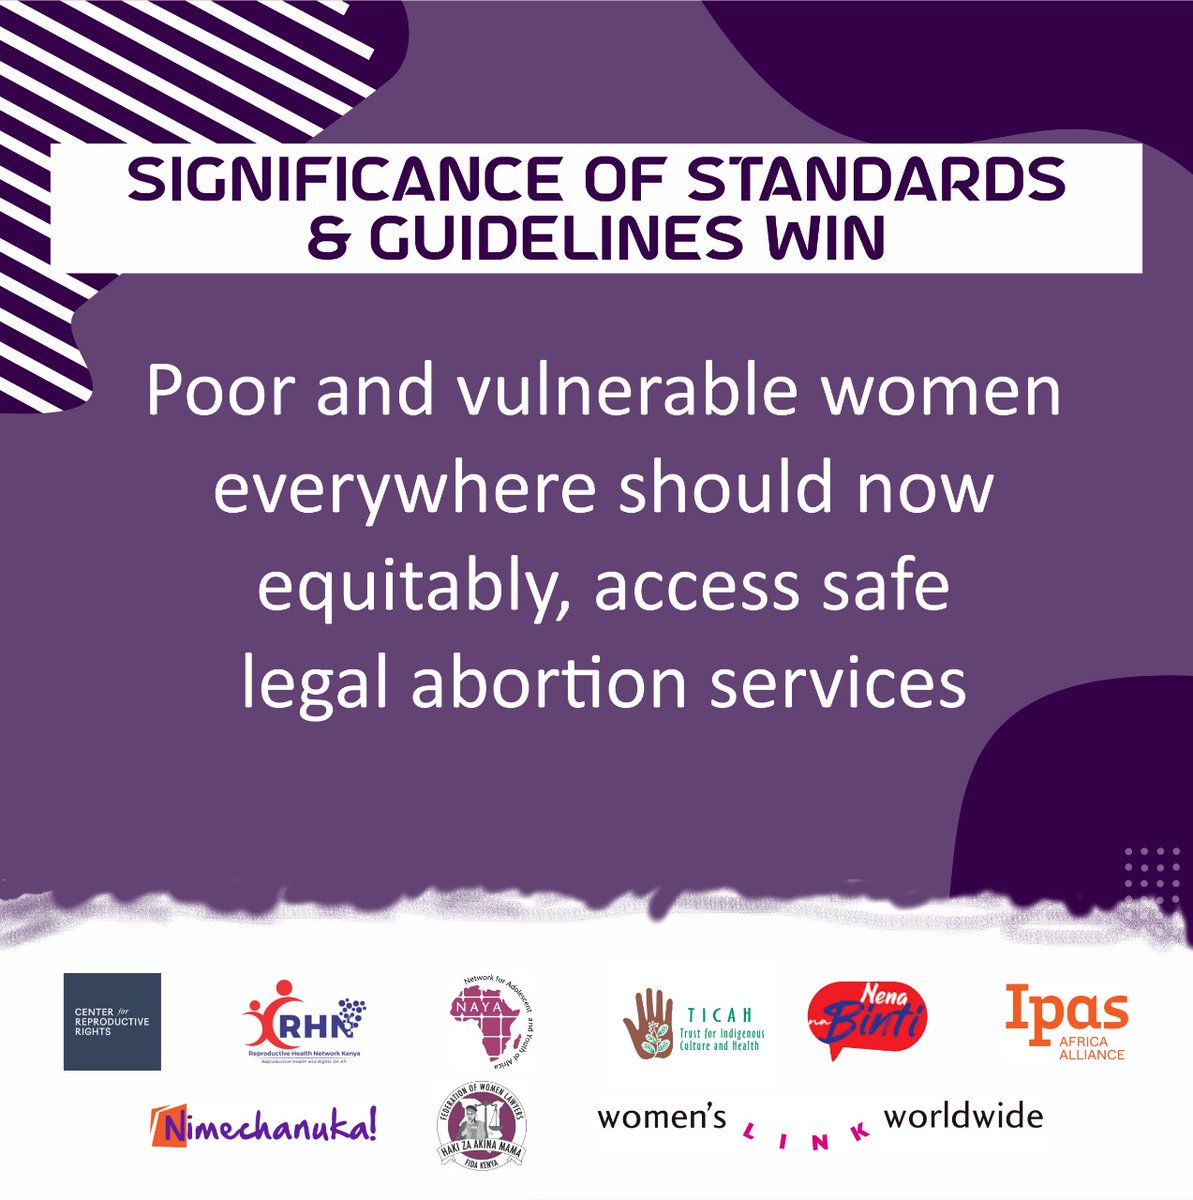 Poor and vulnerable women everywhere should now equitably access safe legal abortion services #DefendHerRightsKE